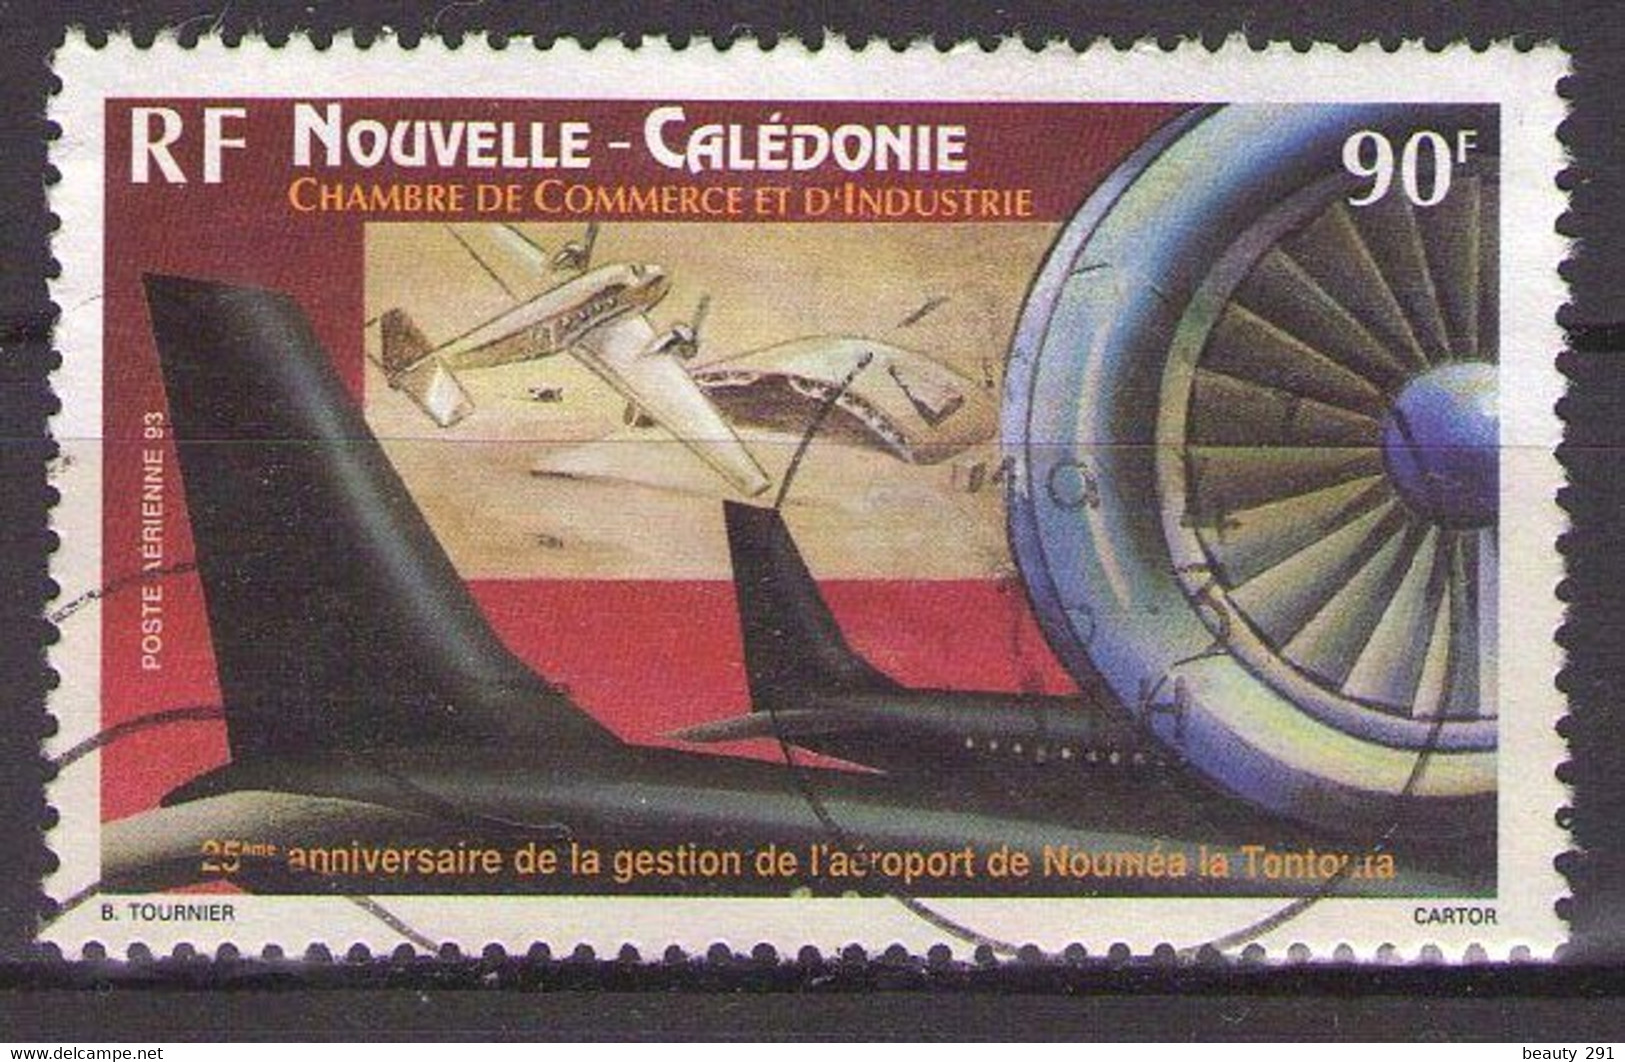 NOUVELLE CALEDONIE - POSTE AERIENNE  1993  Mi 971   USED - Used Stamps